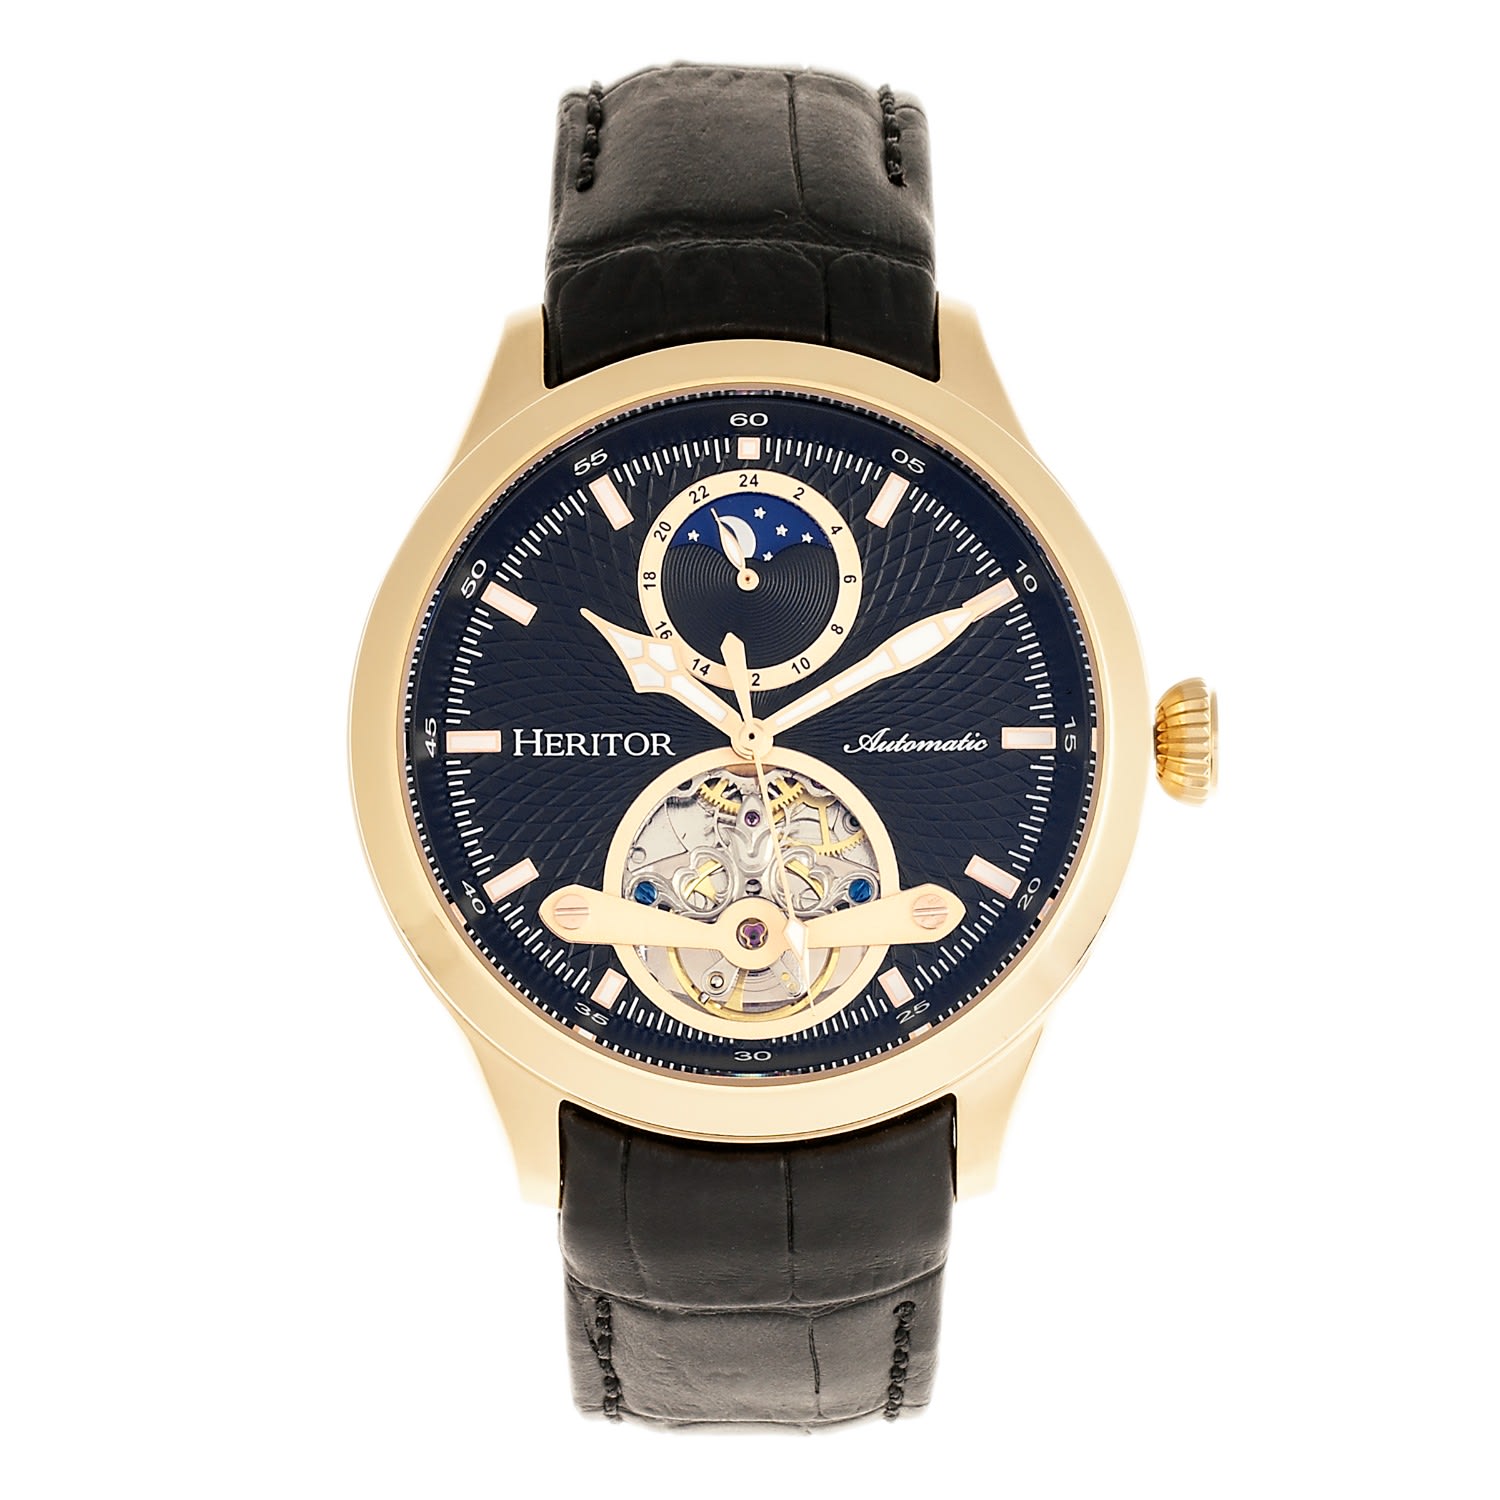 Men’s Black / Gold Gregory Semi-Skeleton Leather-Band Watch With Moon Phase - Black, Gold Heritor Automatic